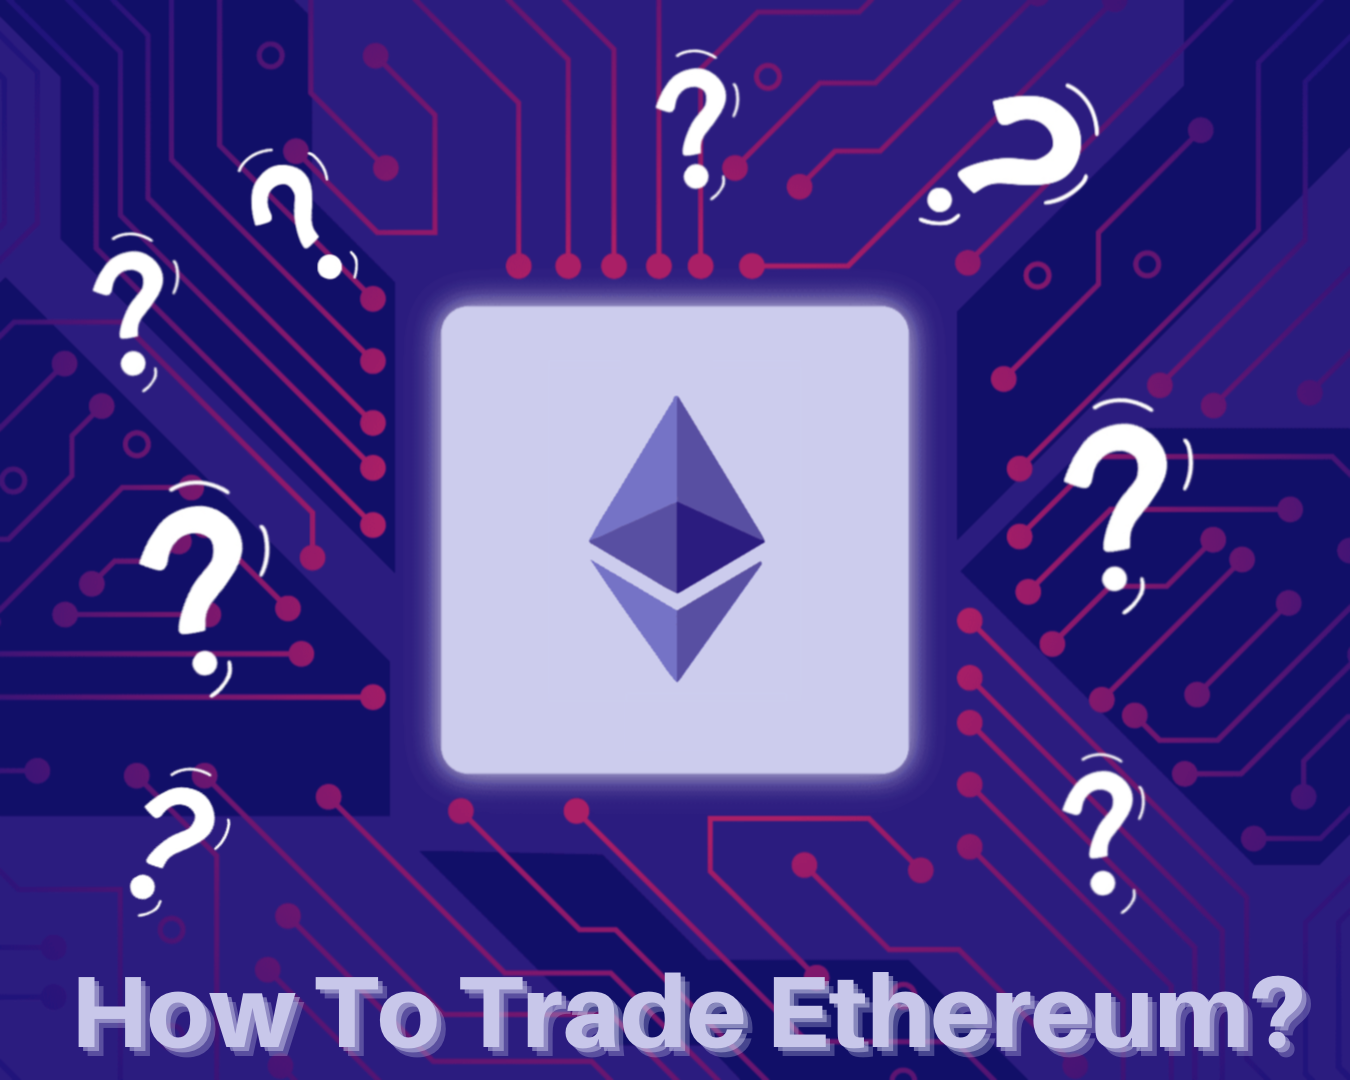 Trade ethereum for free crypto coins to invest 2021